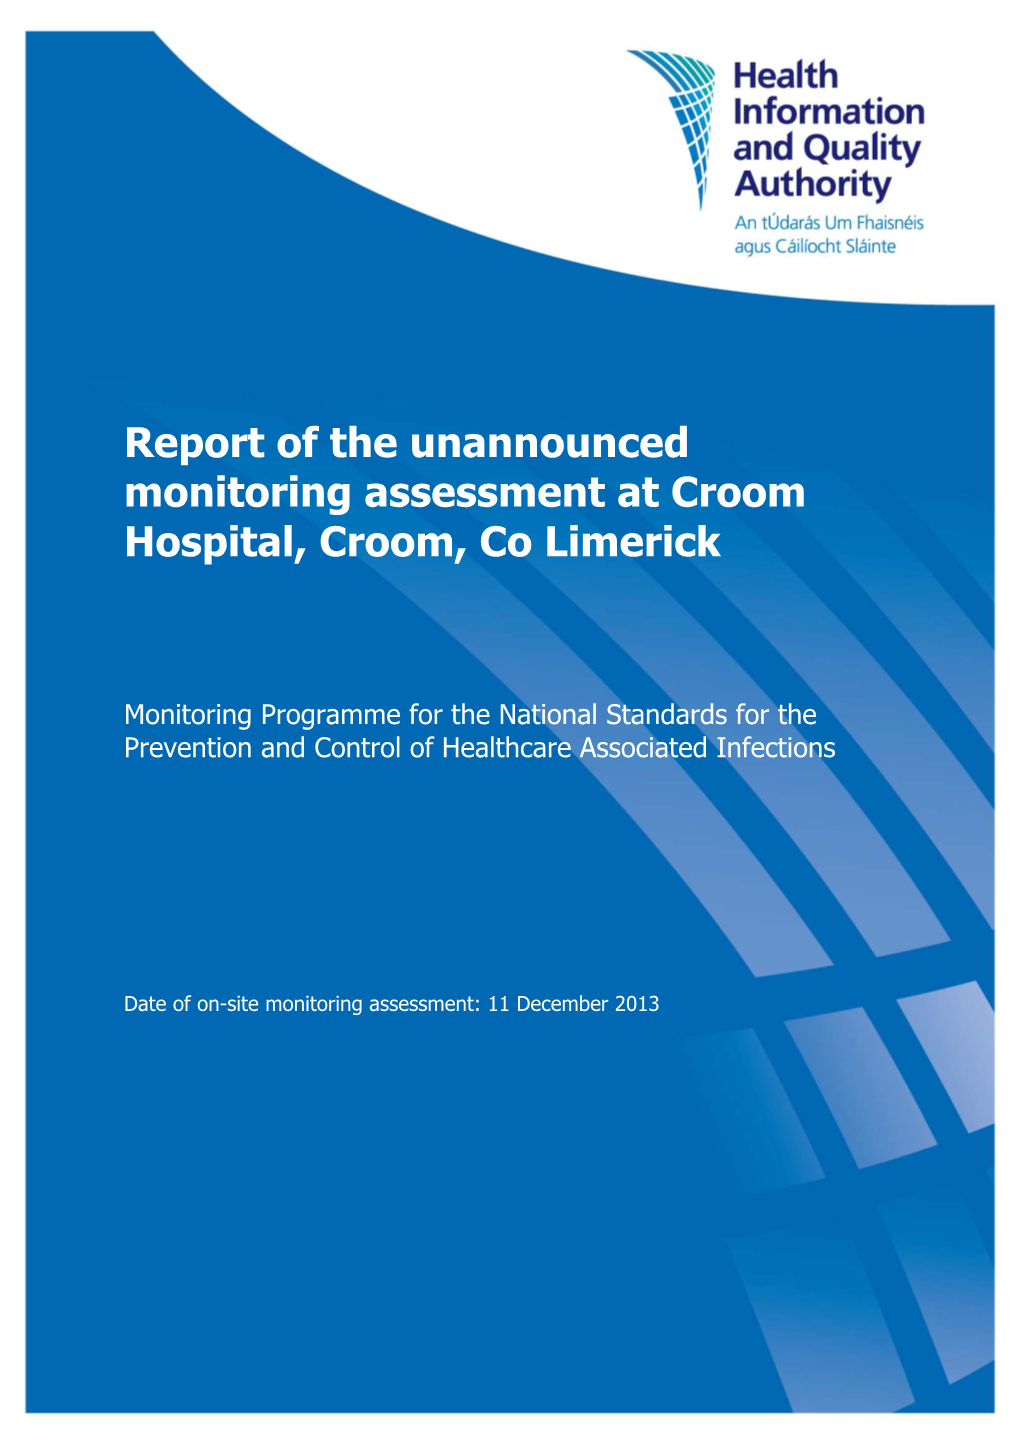 Report of the Unannounced Monitoring Assessment at Croom Hospital, Croom, Co Limerick